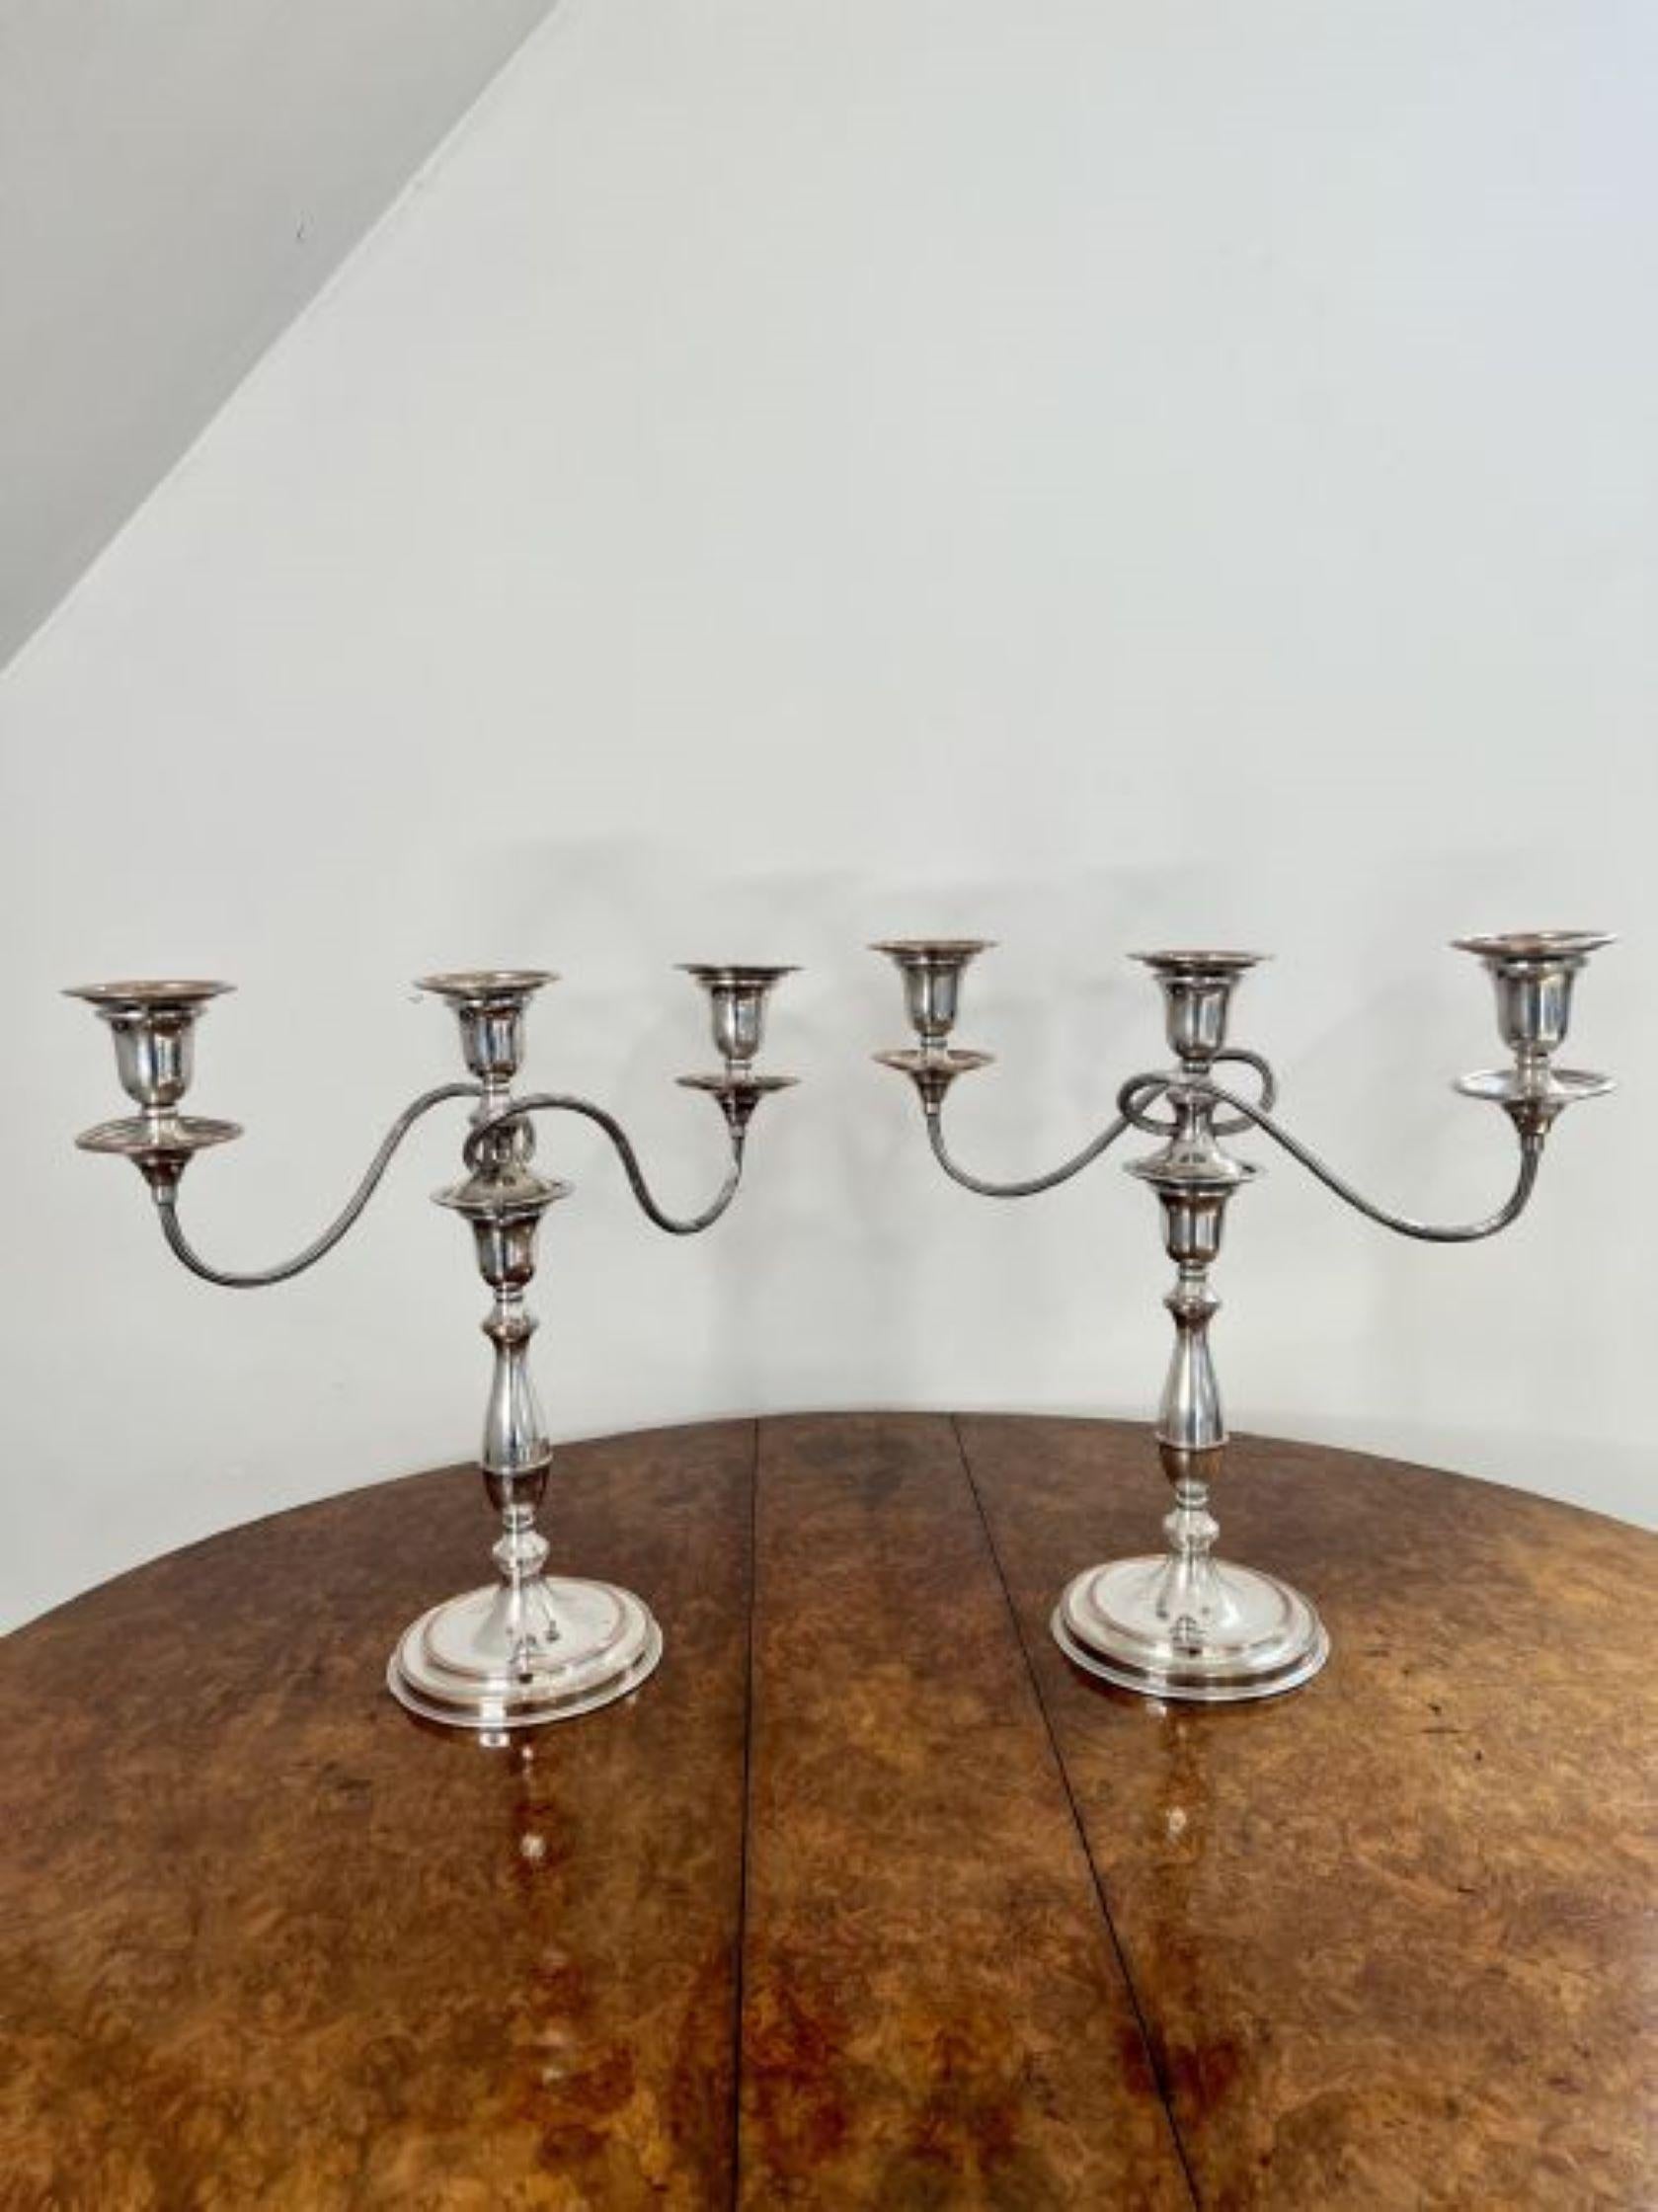 Stunning pair of quality antique Edwardian silver plated candelabras having a stunning pair of antique Edwardian silver plated candelabras with three light branches above a shaped column standing on circular bases.